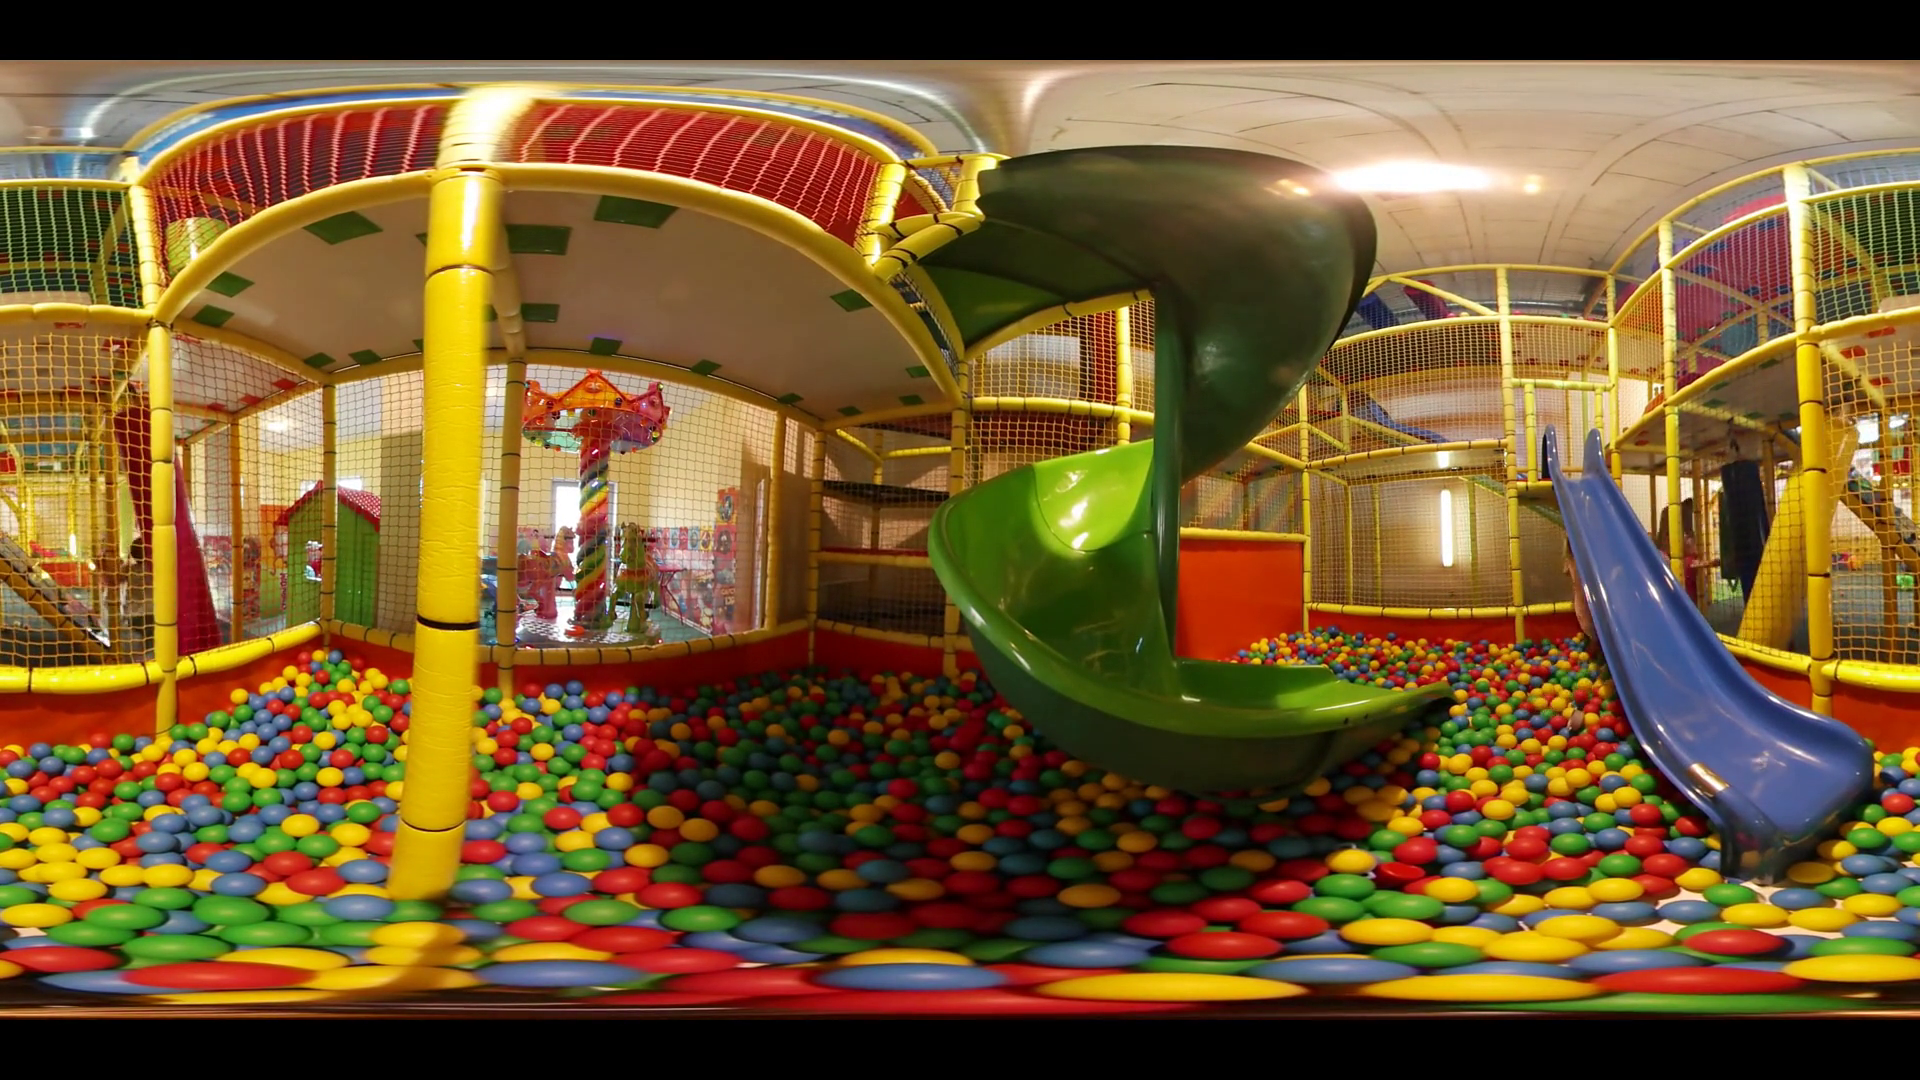 360vr Video Kids In Play Room Strewn With Balls Children's - Kids Room With Slide , HD Wallpaper & Backgrounds